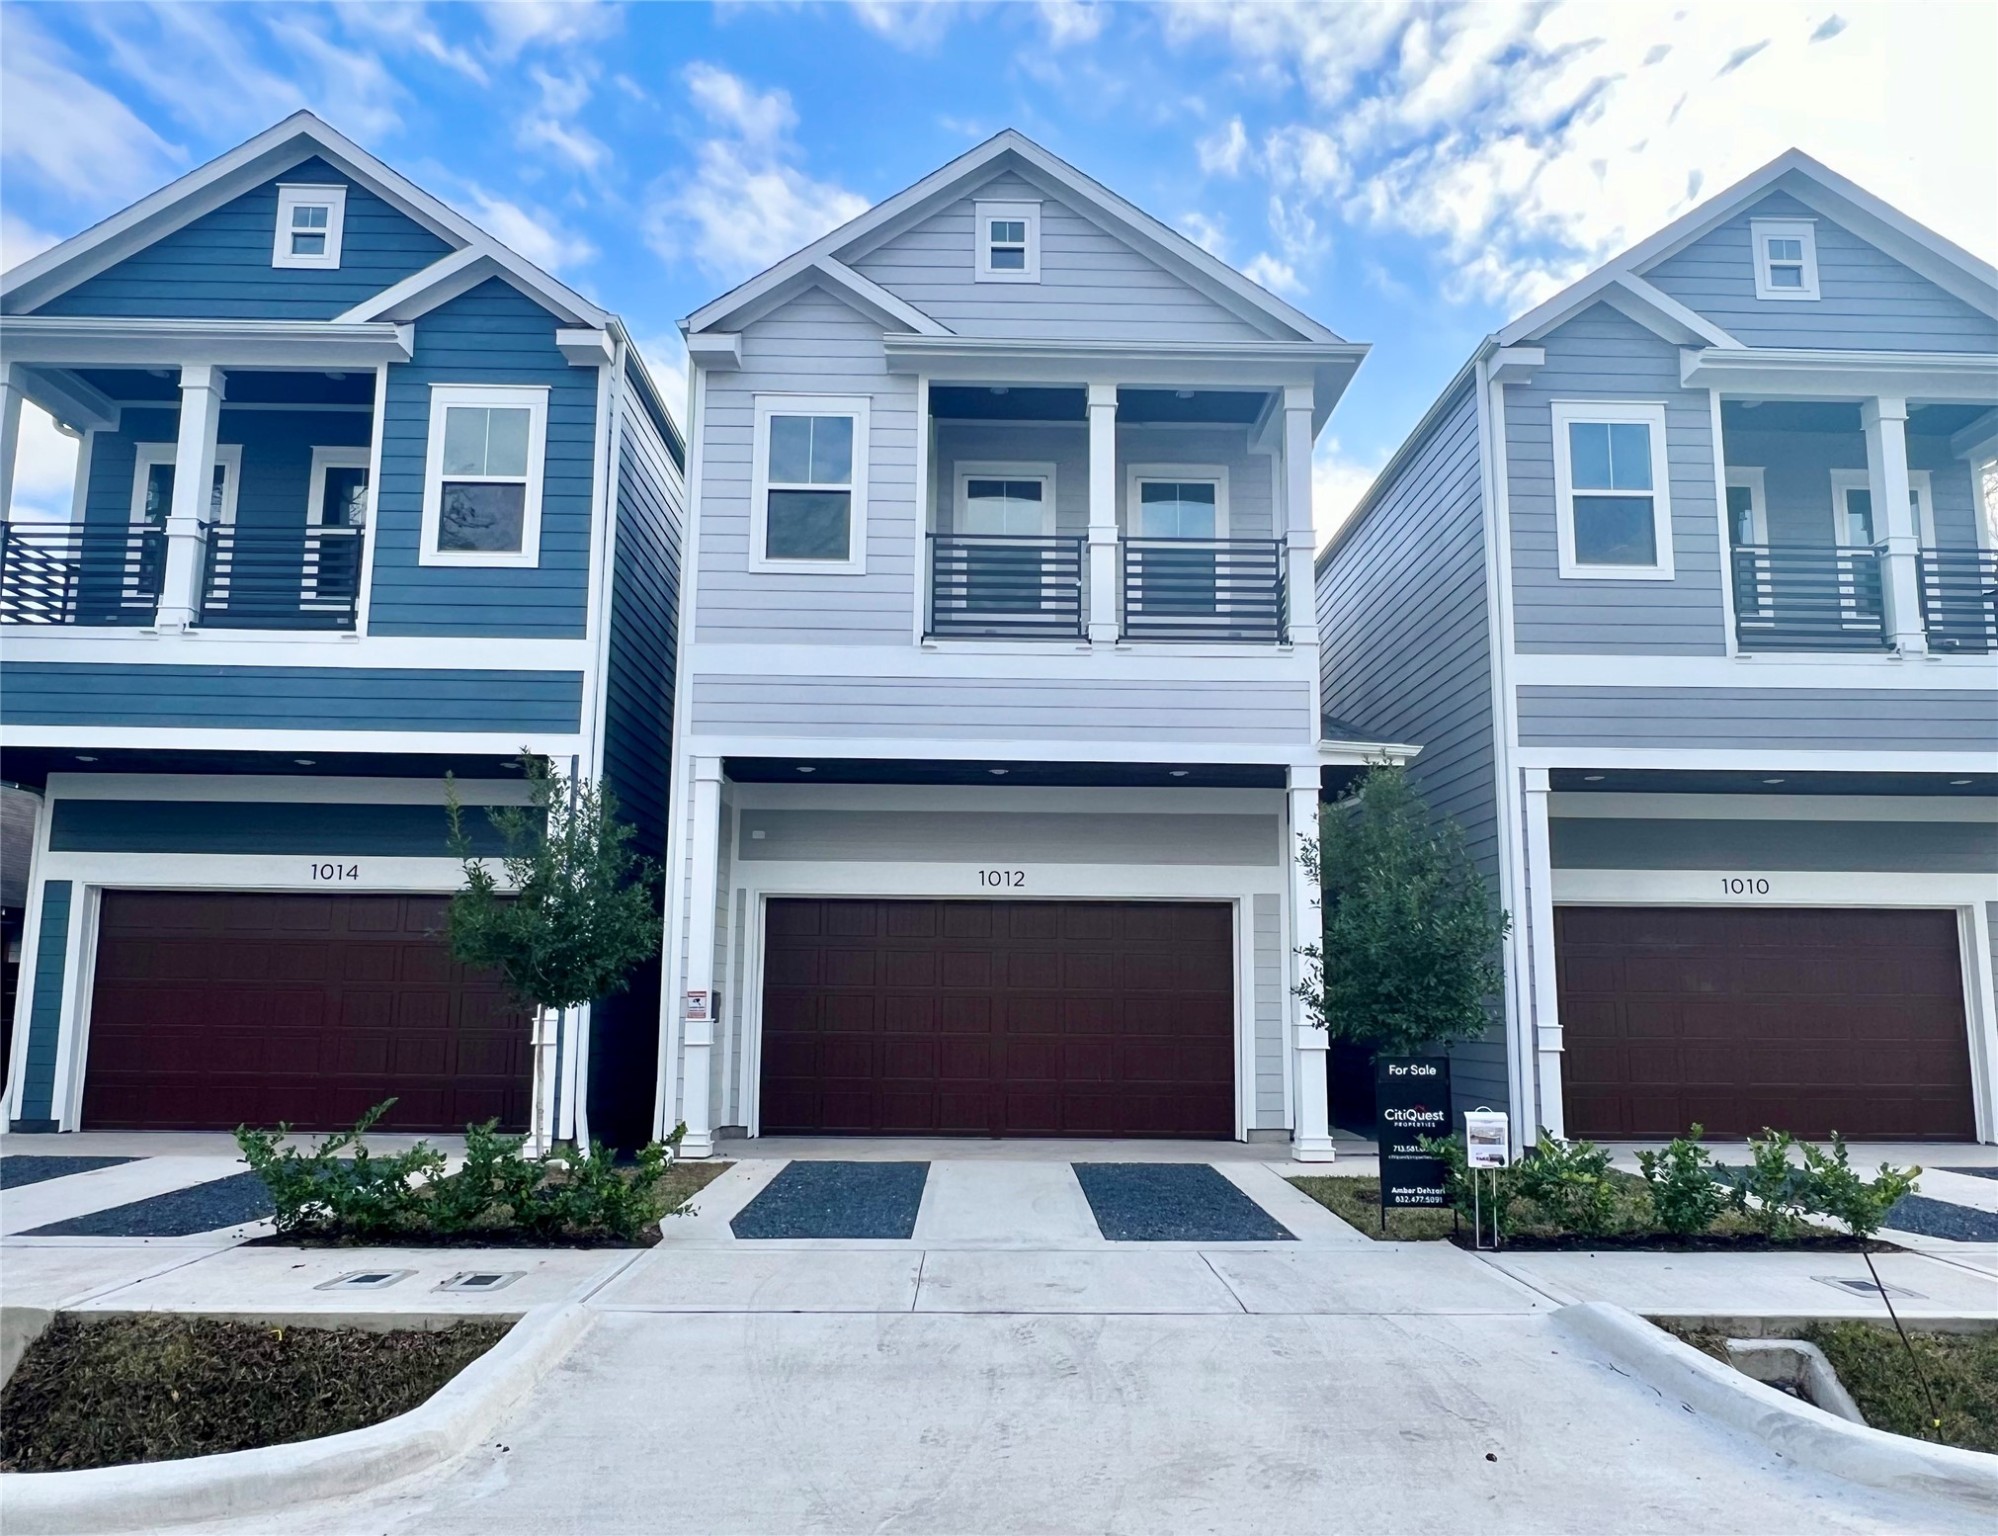 Notice the full-sized driveway, which offers ample space for vehicle parking and easy access to the home, while also contributing to the home's curb appeal with its well-integrated design.